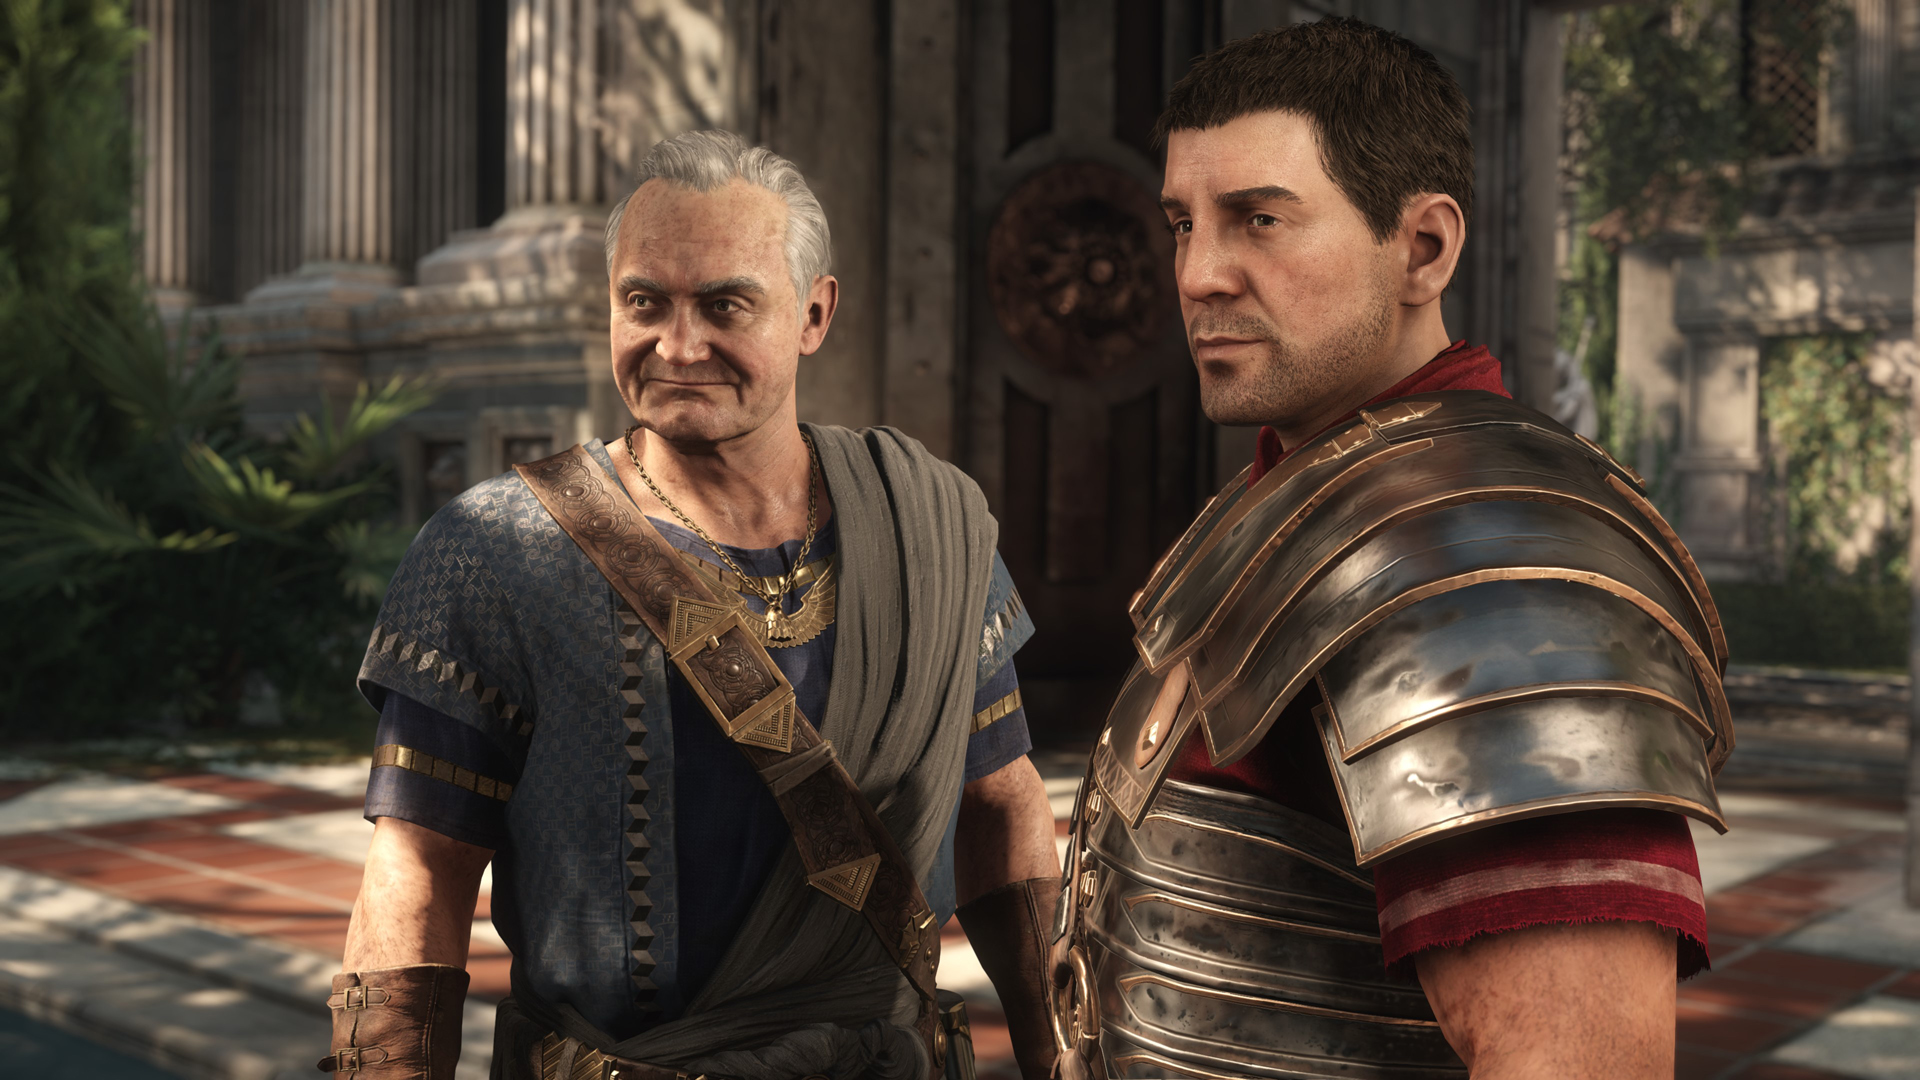 Ryse: Son of Rome is coming to PC